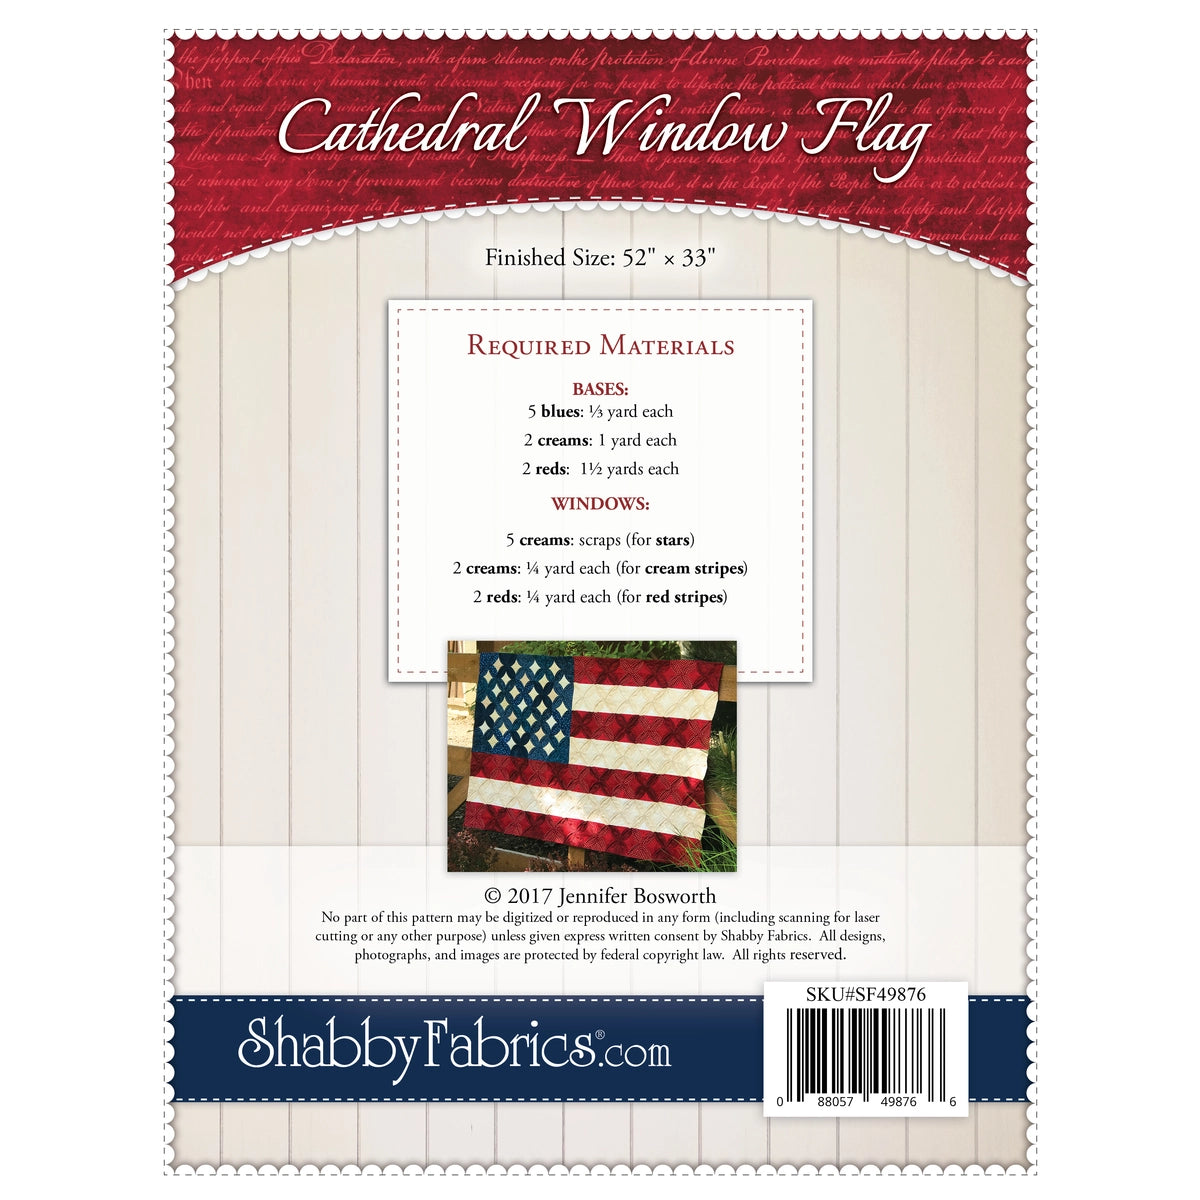 Shabby Fabrics Cathedral Window Flag Quilt Pattern